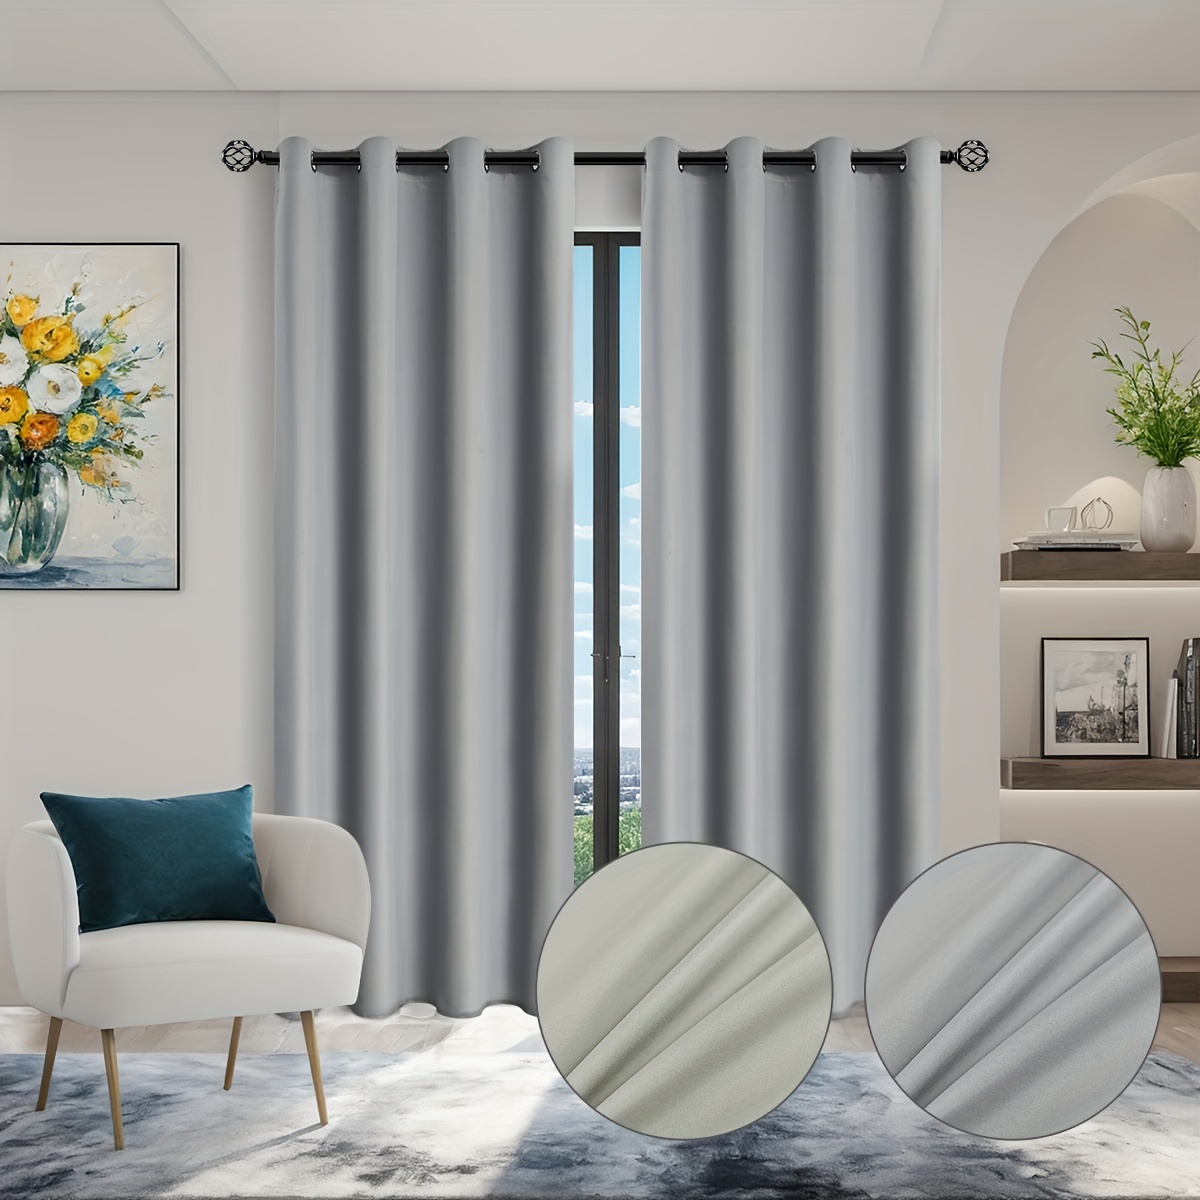 

2-pack Contemporary Blackout Curtain Panels - Thermal Insulated, Twill Weave, Grommet Top Drapes With Eyelet For Sun Protection, Uncorded, 100% Polyester For Living Room, Bedroom, Various Rooms